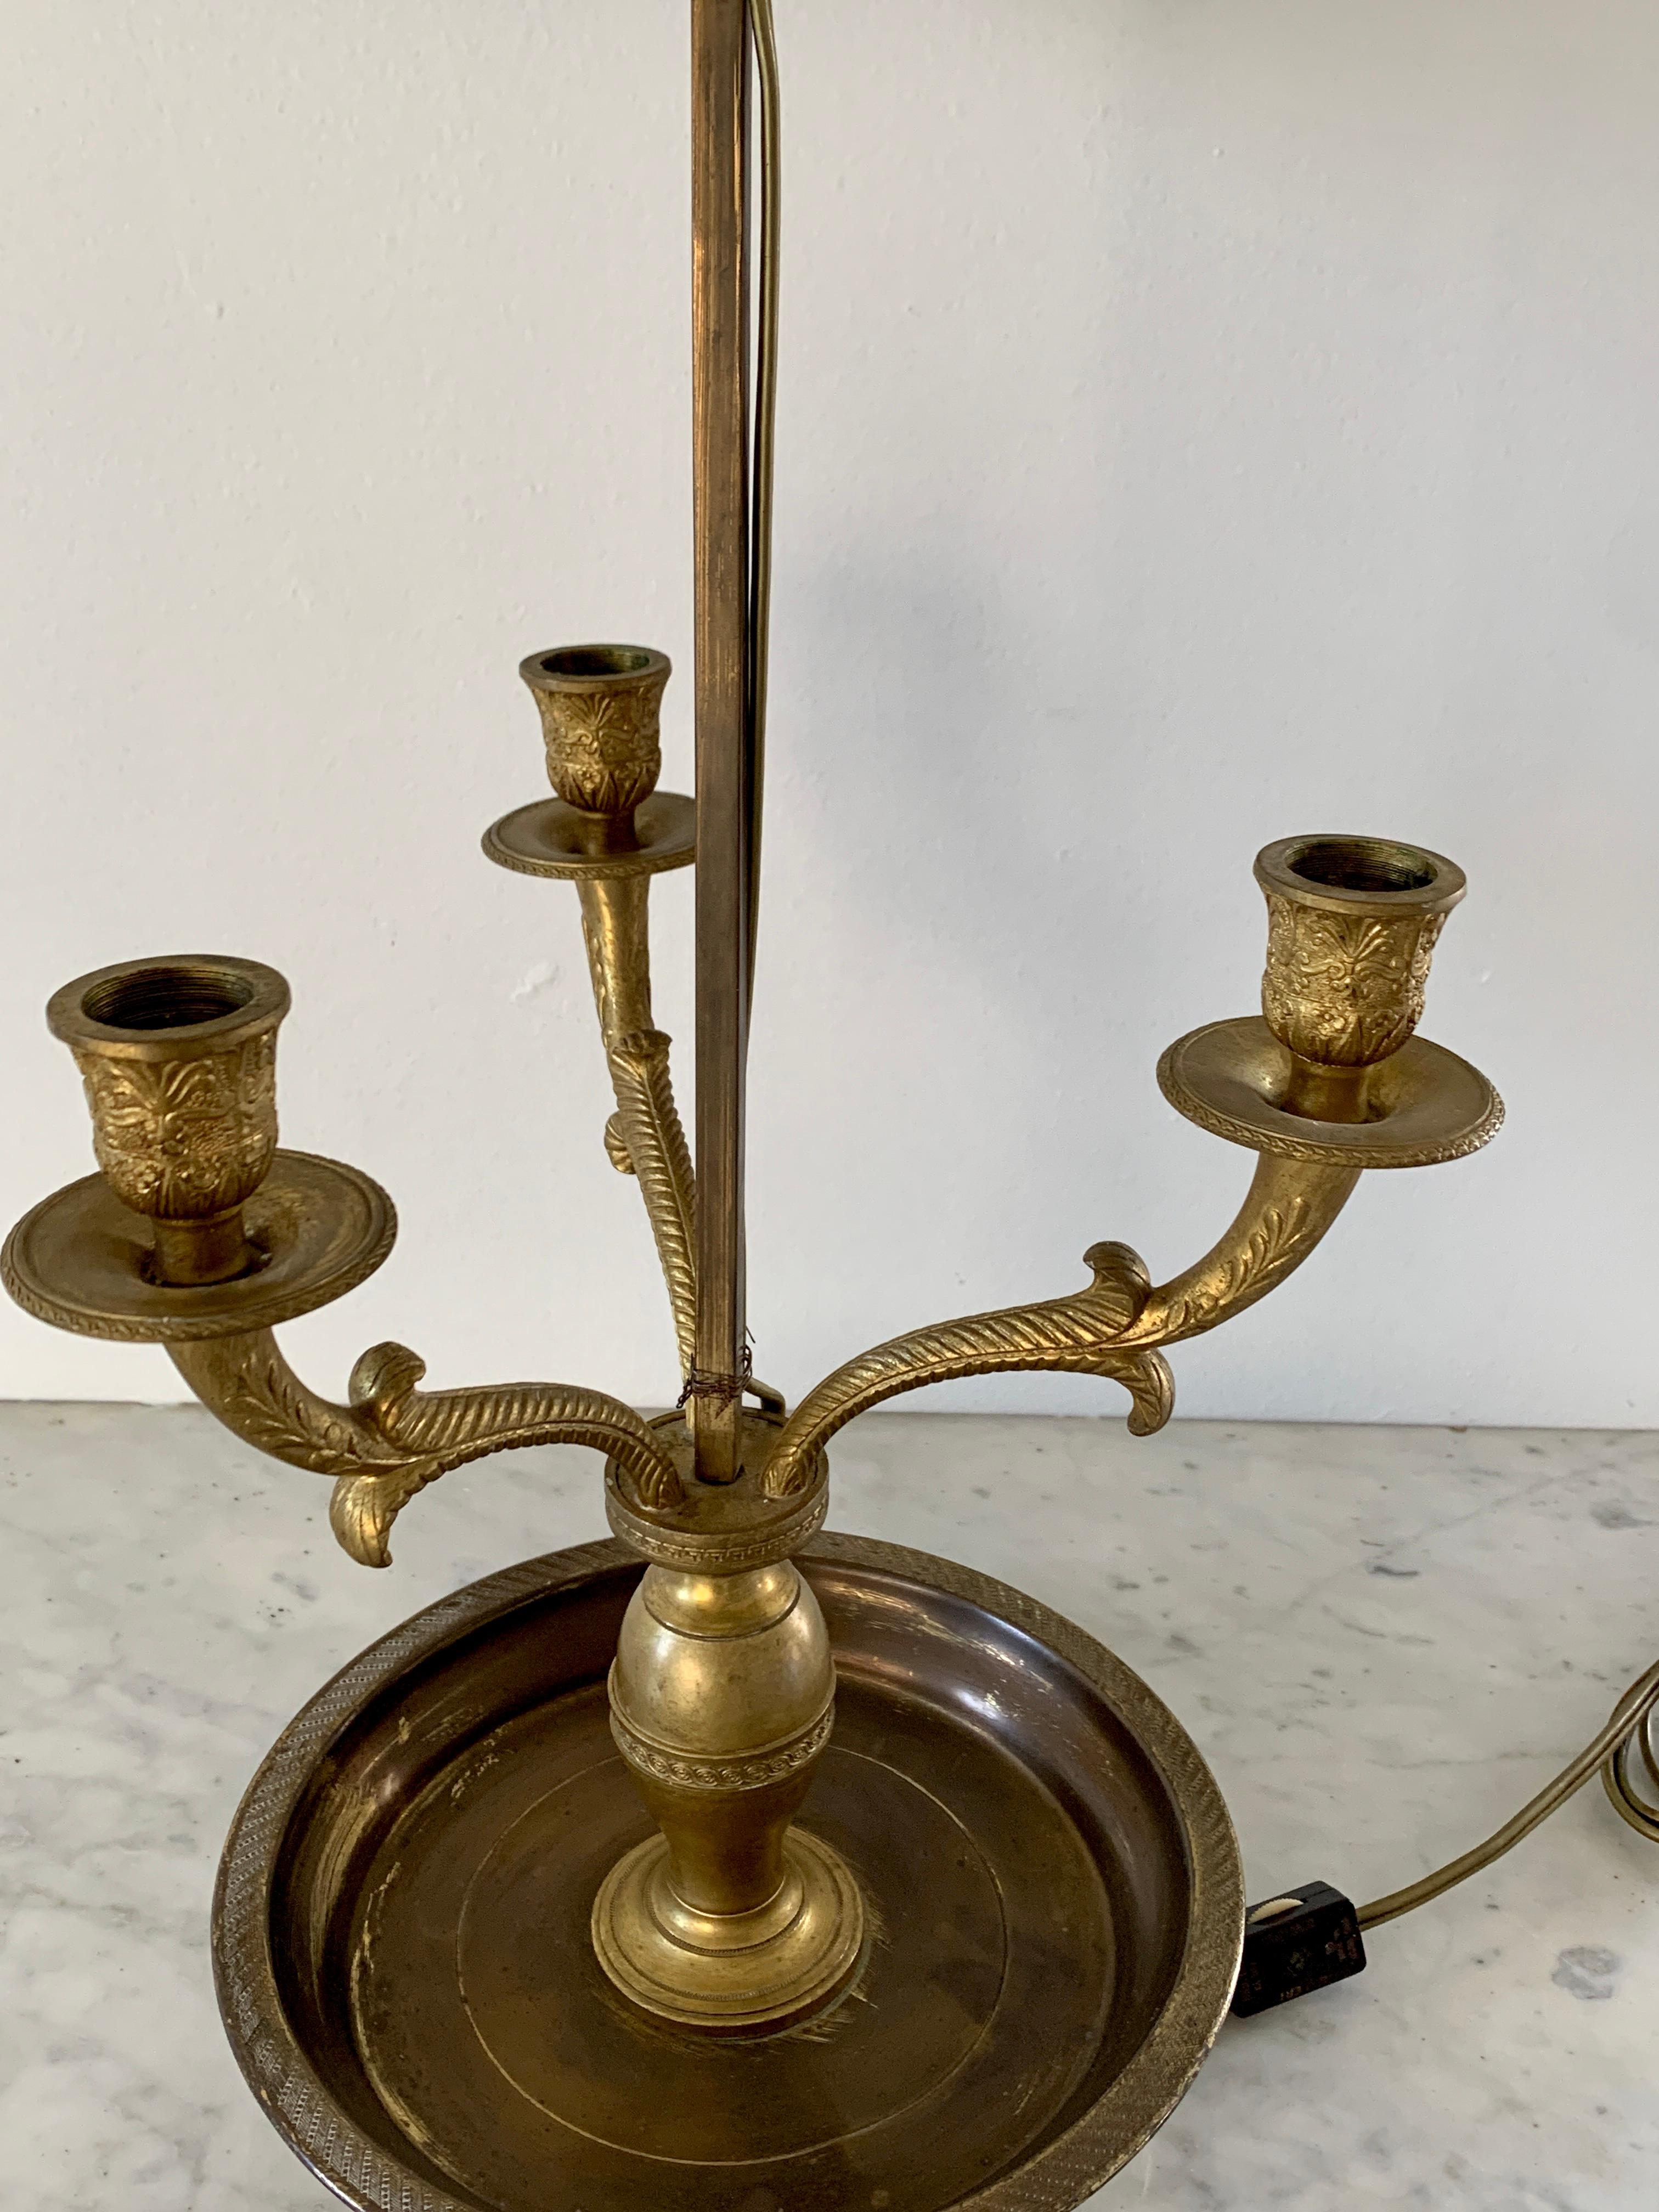 American Mid-20th Century Brass Three-Arm Bouillotte Lamp With Black Tole Shade For Sale